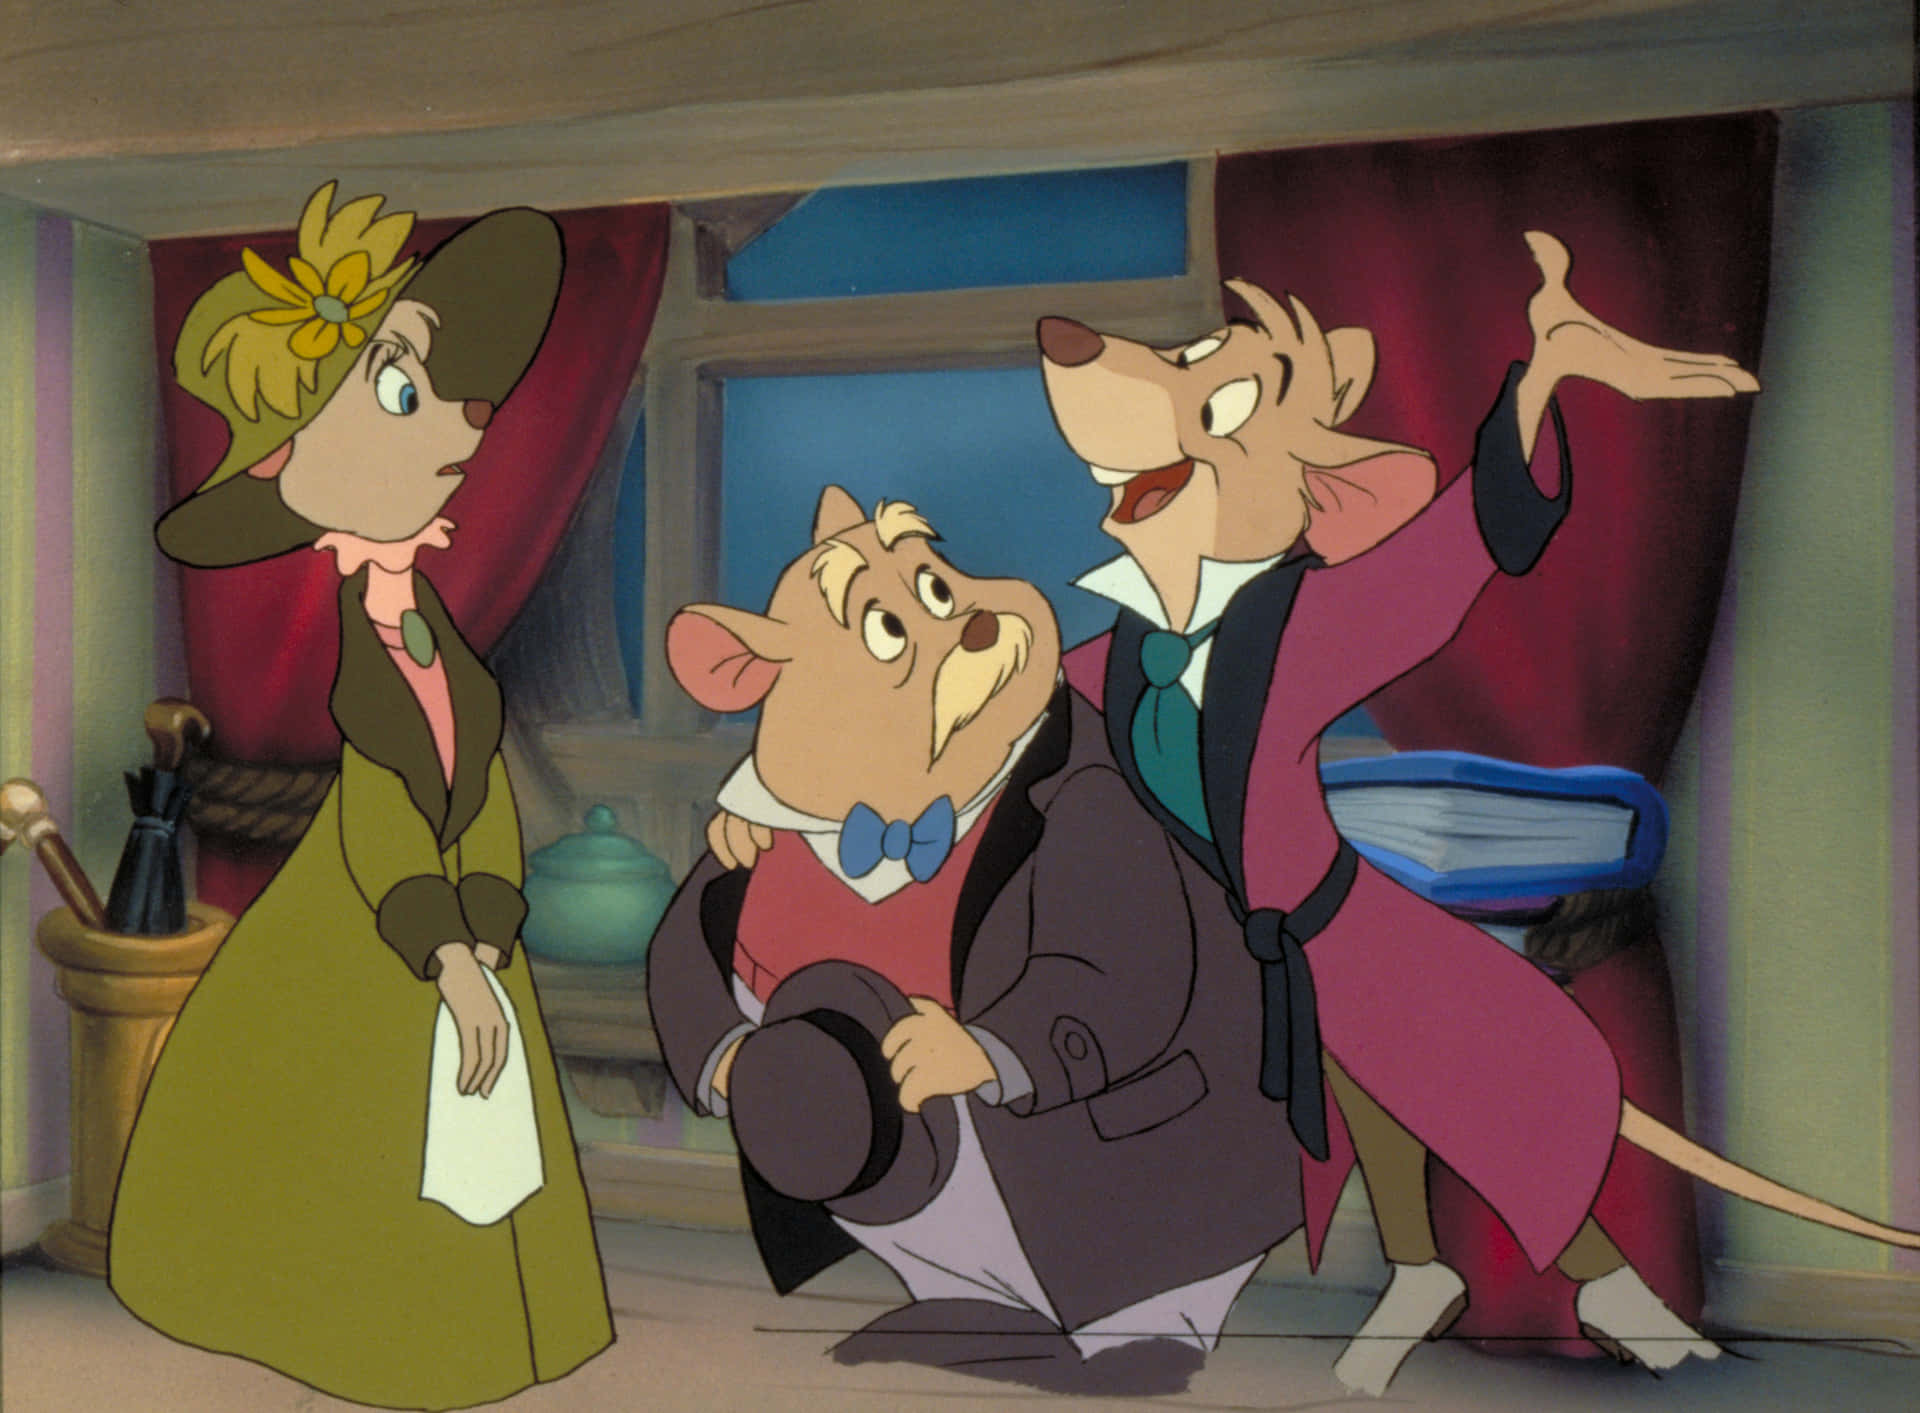 Basil, the Great Mouse Detective, with Dr. Dawson and Olivia in an adventurous scene. Wallpaper